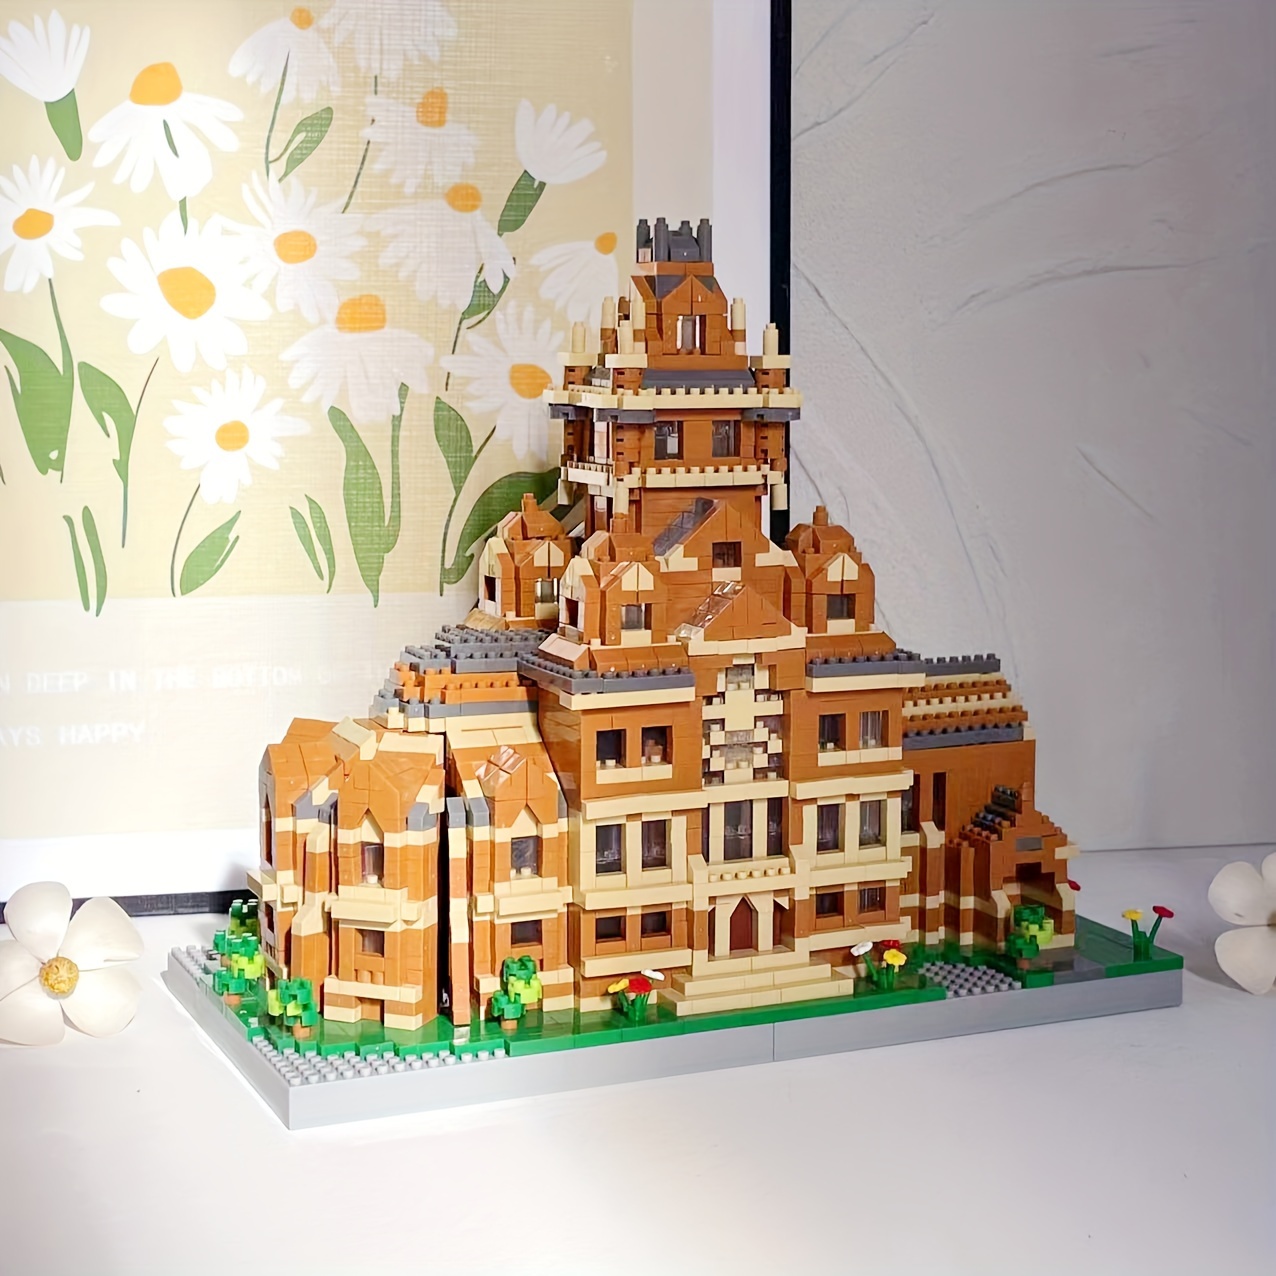 

Small Building Blocks, Difficult Famous Building Model, Three-dimensional Assembly Toy, Christmas Birthday Gift